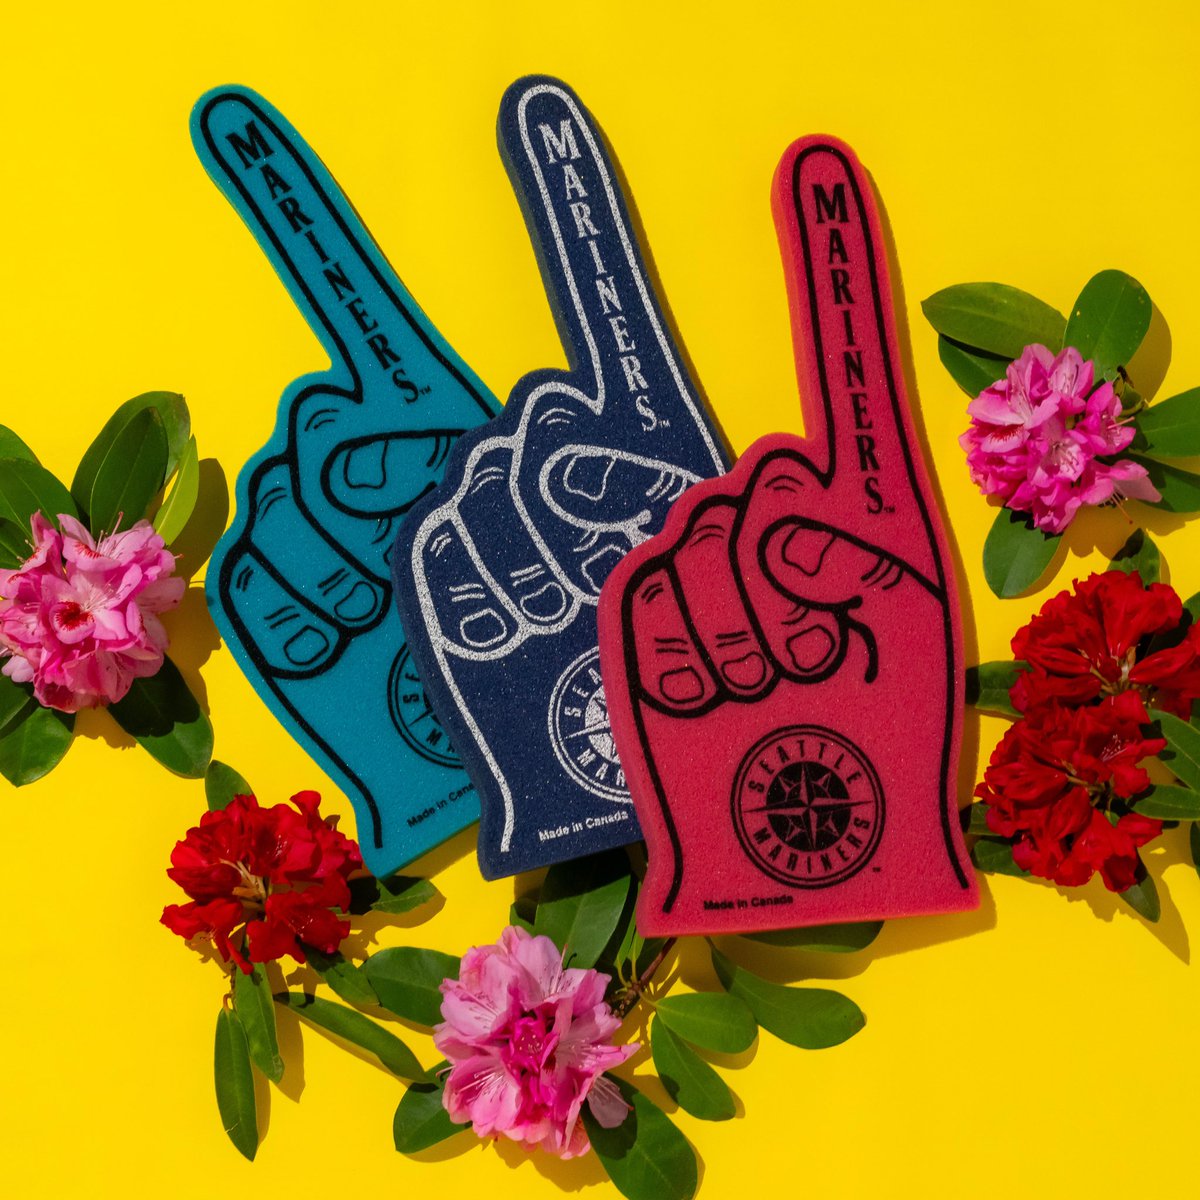 Mariners baseball, sun and Mother’s Day weekend - what a combo! ⚾️☀️🌸 Come visit us at @TMobilePark or Downtown Seattle for some last minute shopping. We open at 11am today!